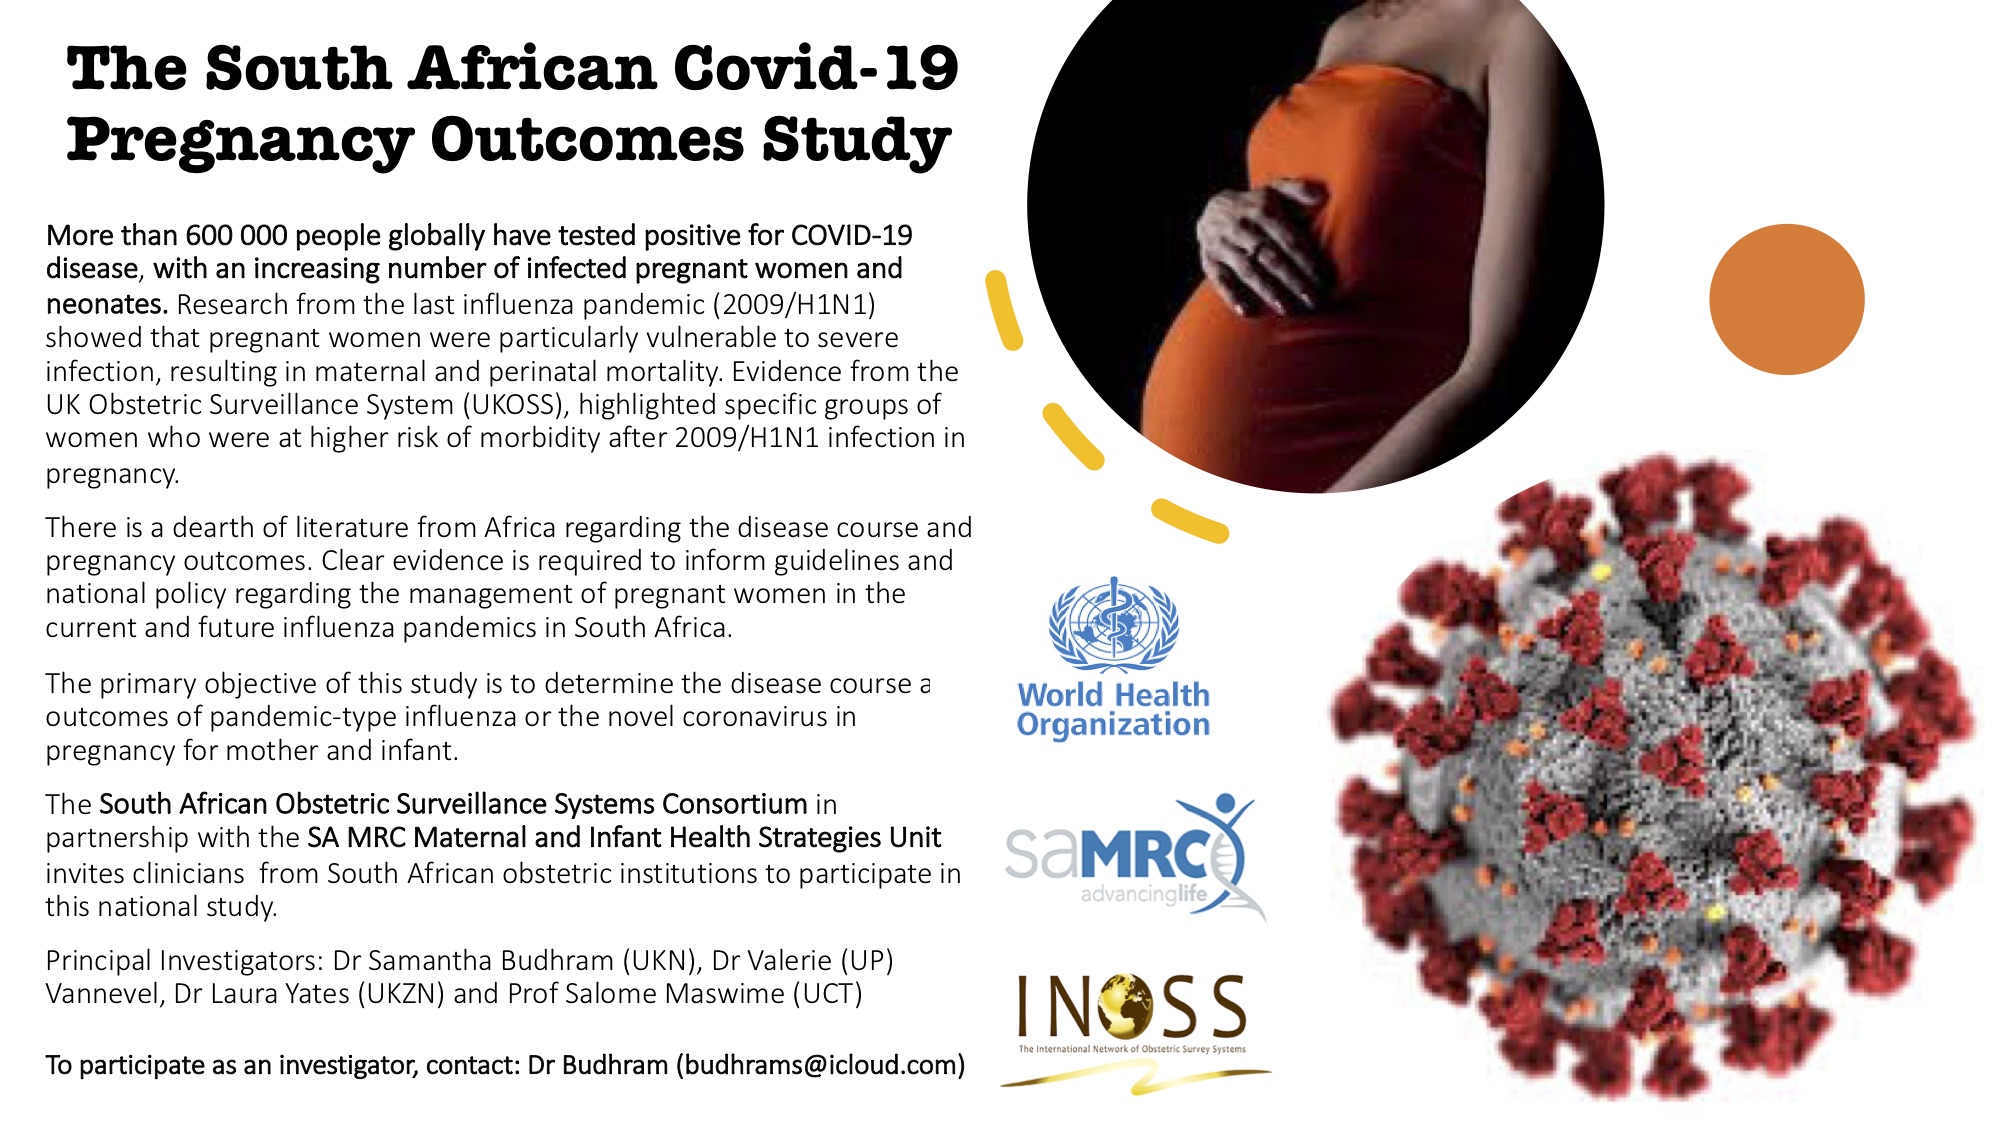 The South African COVID-19 Pregnancy Outcomes Study